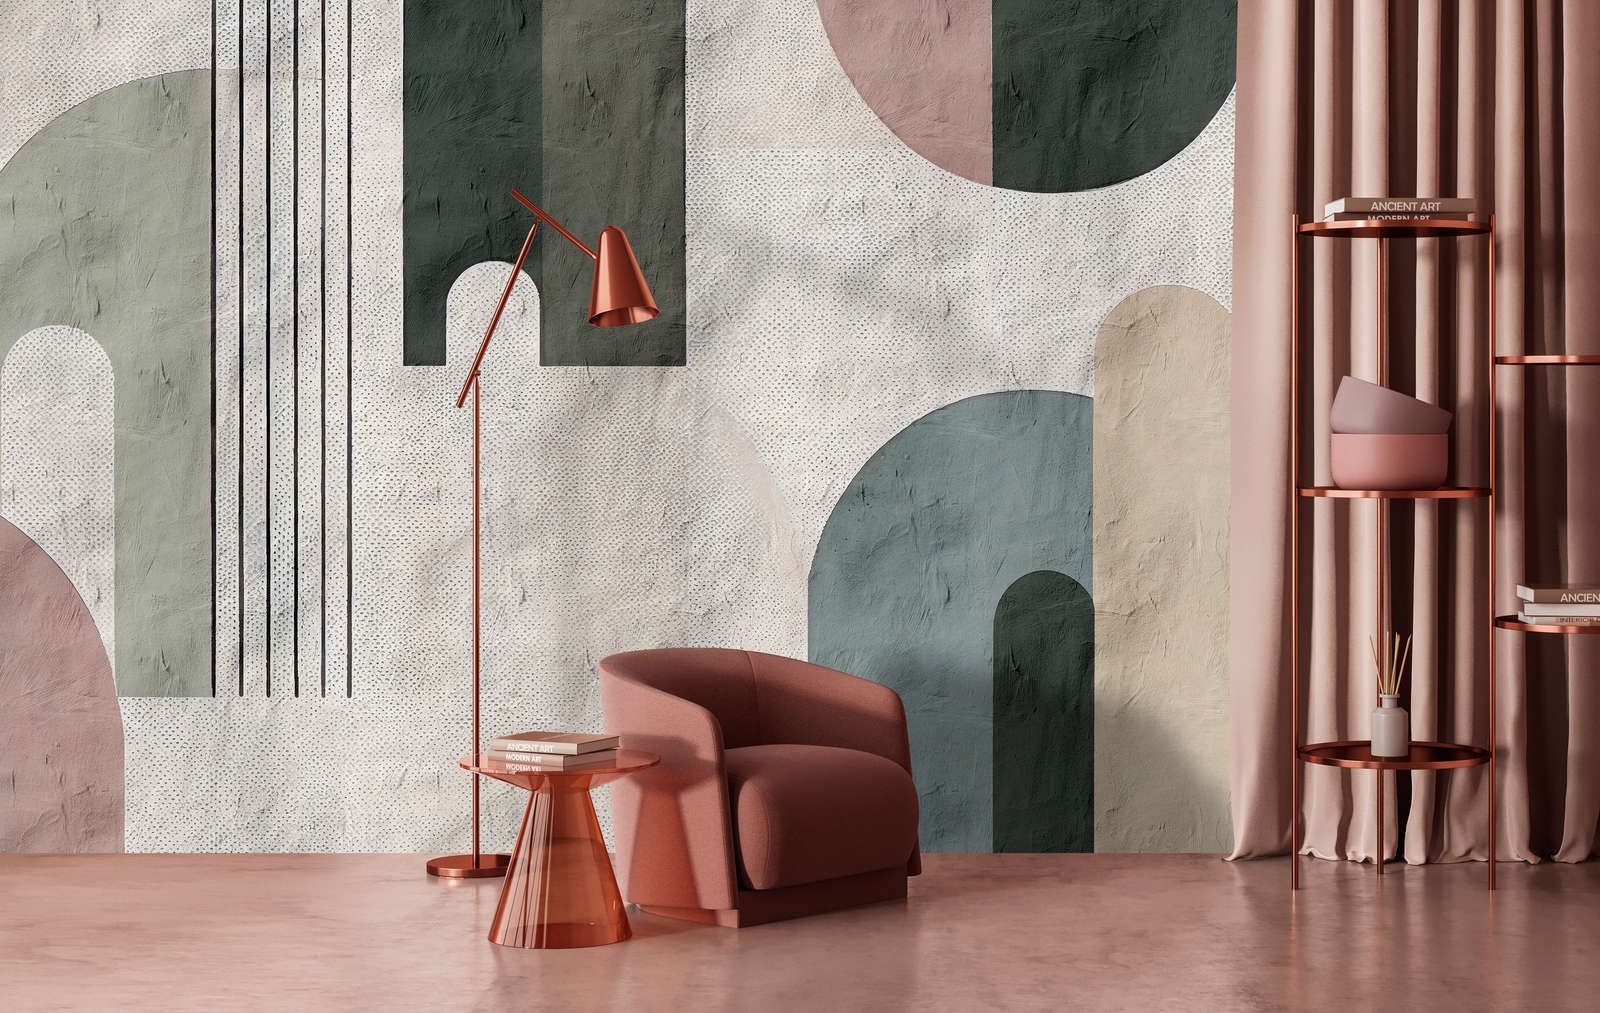             Photo wallpaper »torenta« - Graphic pattern with round arch, clay plaster texture - Matt, smooth non-woven fabric
        